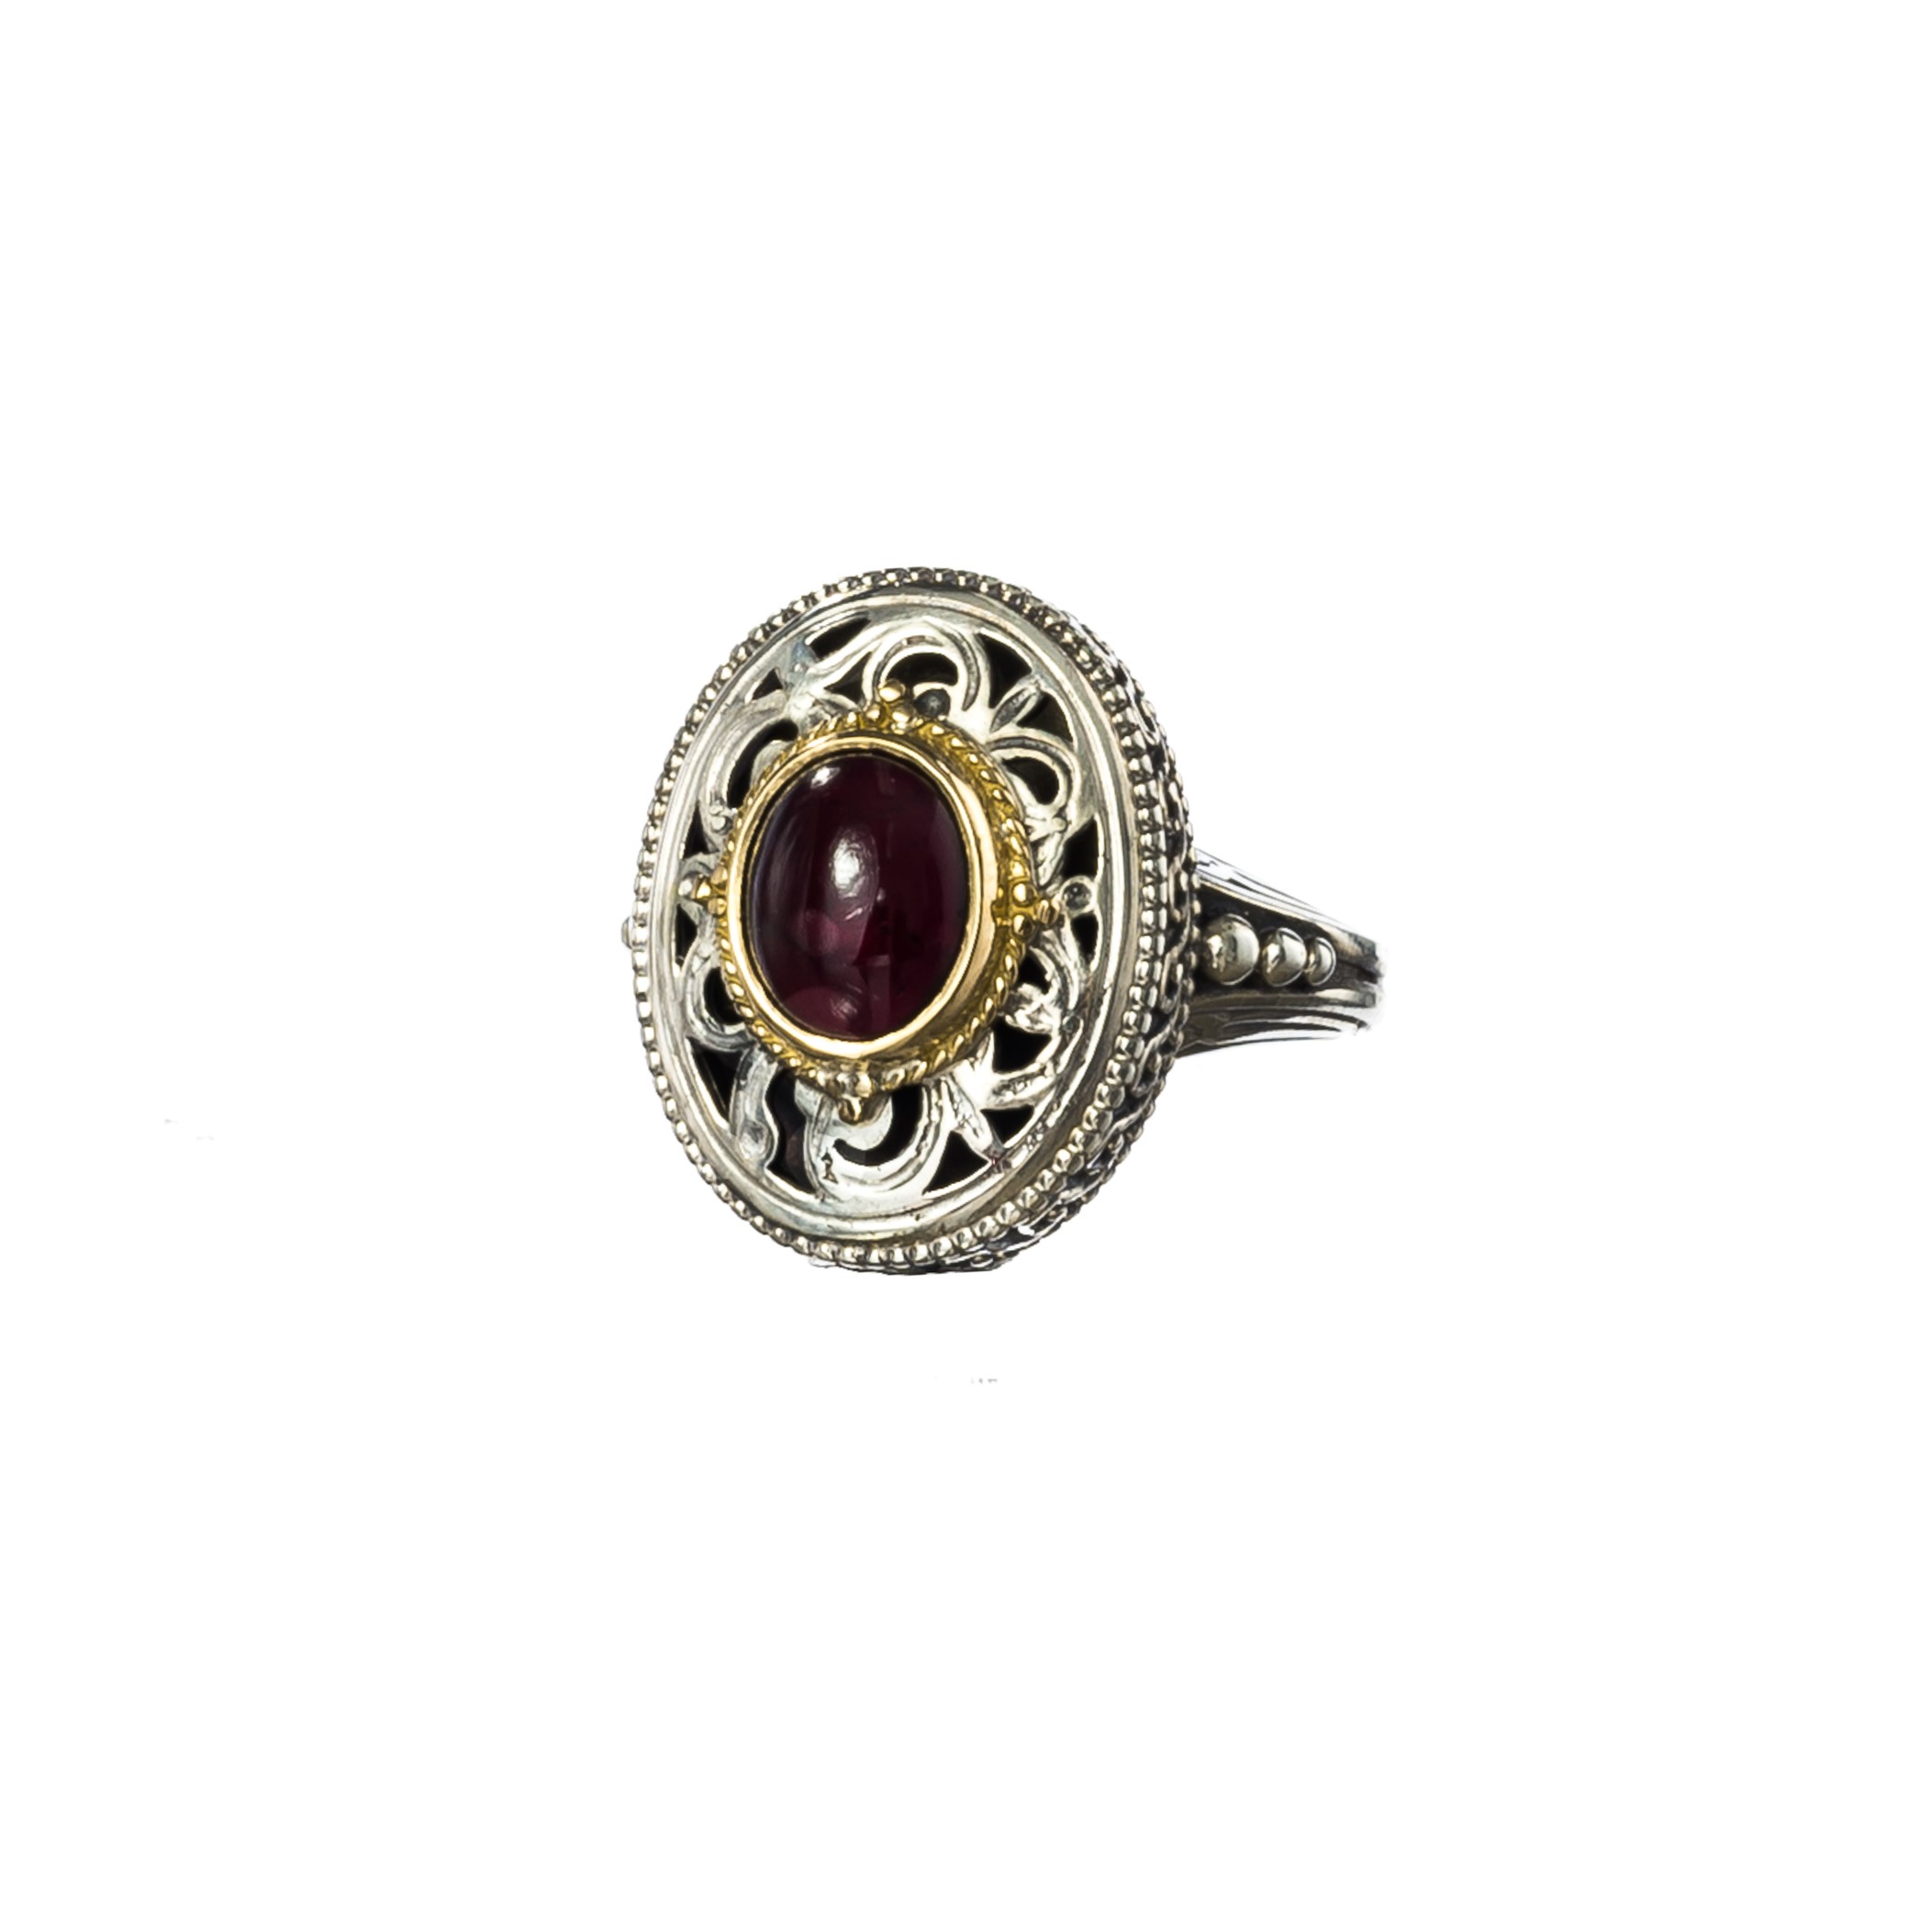 Garden shadows big oval ring in 18K Gold and Sterling Silver with garnet